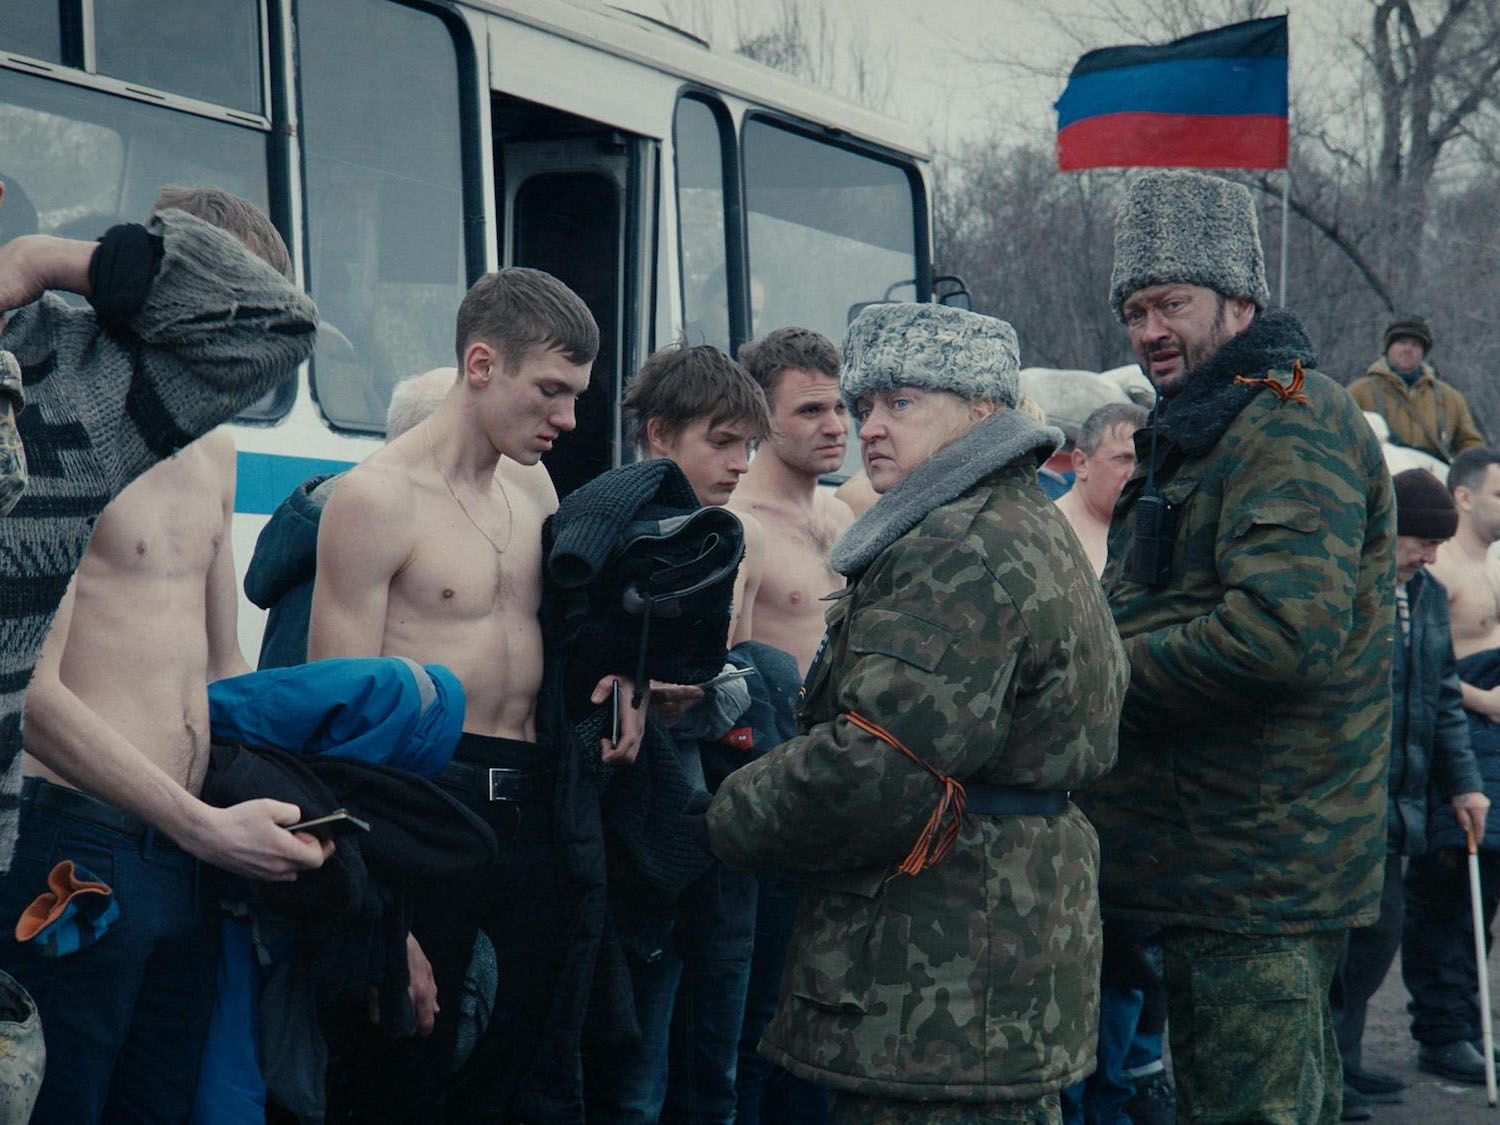 Donbass Review Both Too Much And Too Little About The War In Ukraine Sight And Sound Bfi 2734